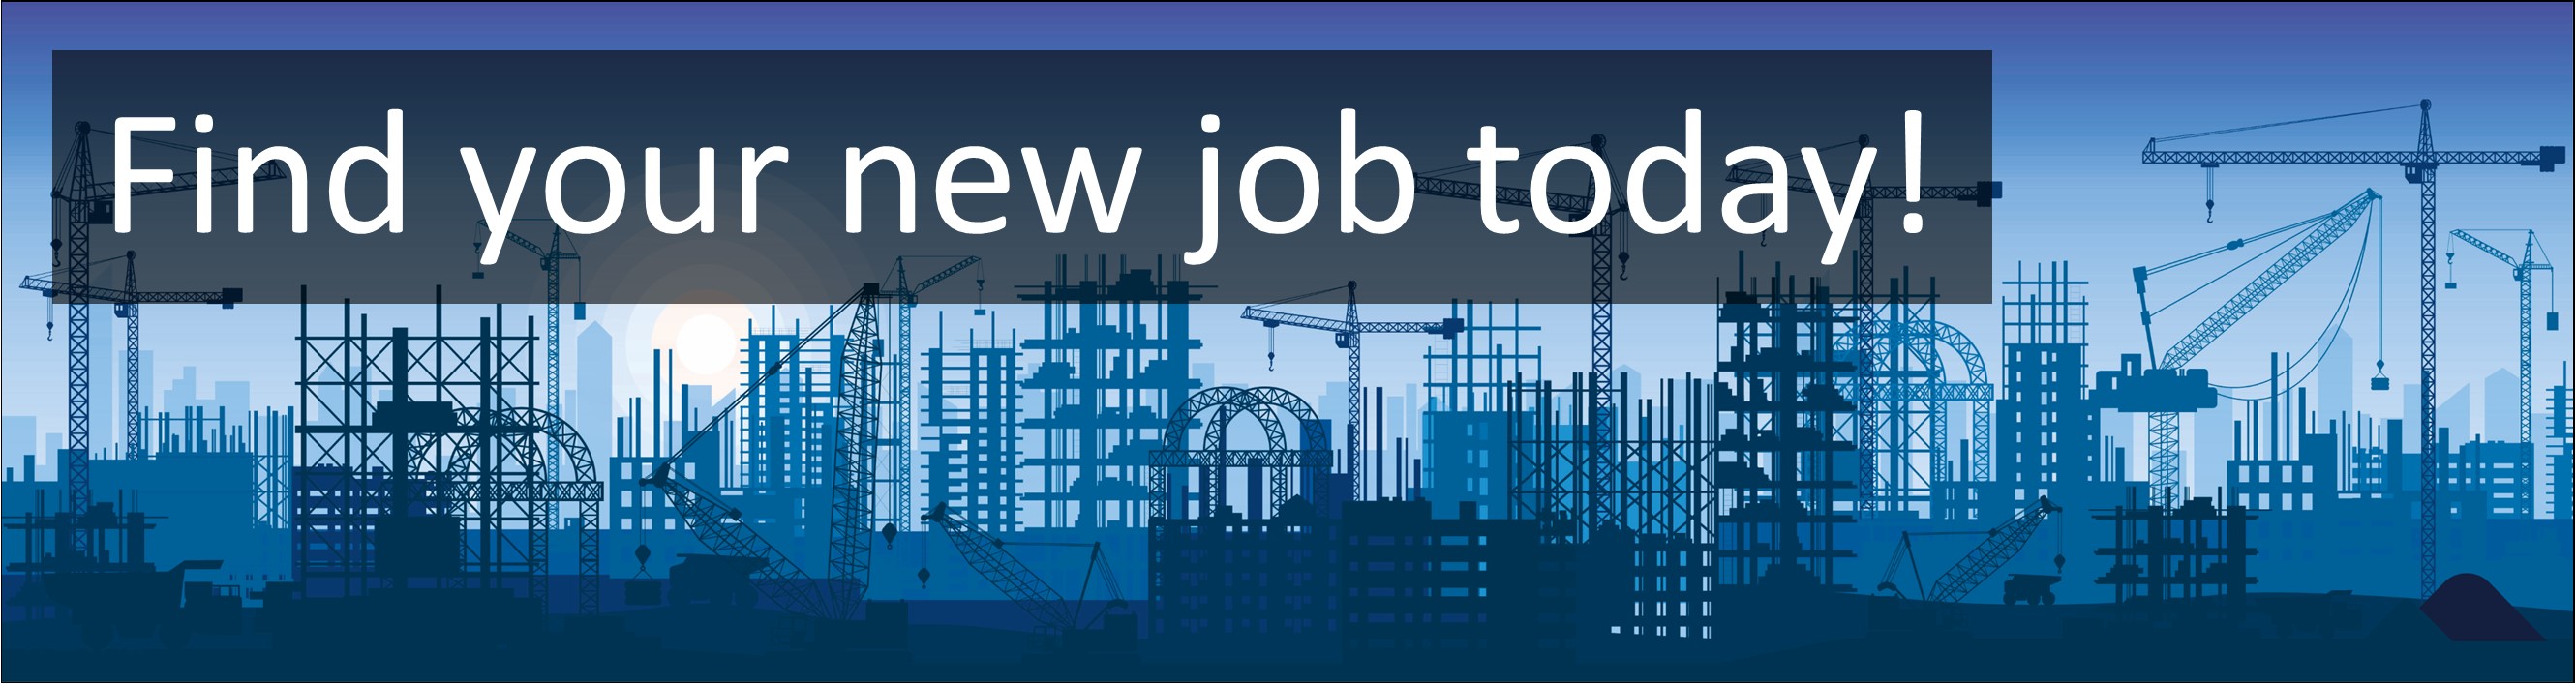 Construction & Trades Jobs. Graduate / Junior Project Manager / Capital Projects Jobs, Careers & Vacancies in Farnborough, Hampshire, South-East England Advertised by AWD online – Multi-Job Board Advertising and CV Sourcing Recruitment Services